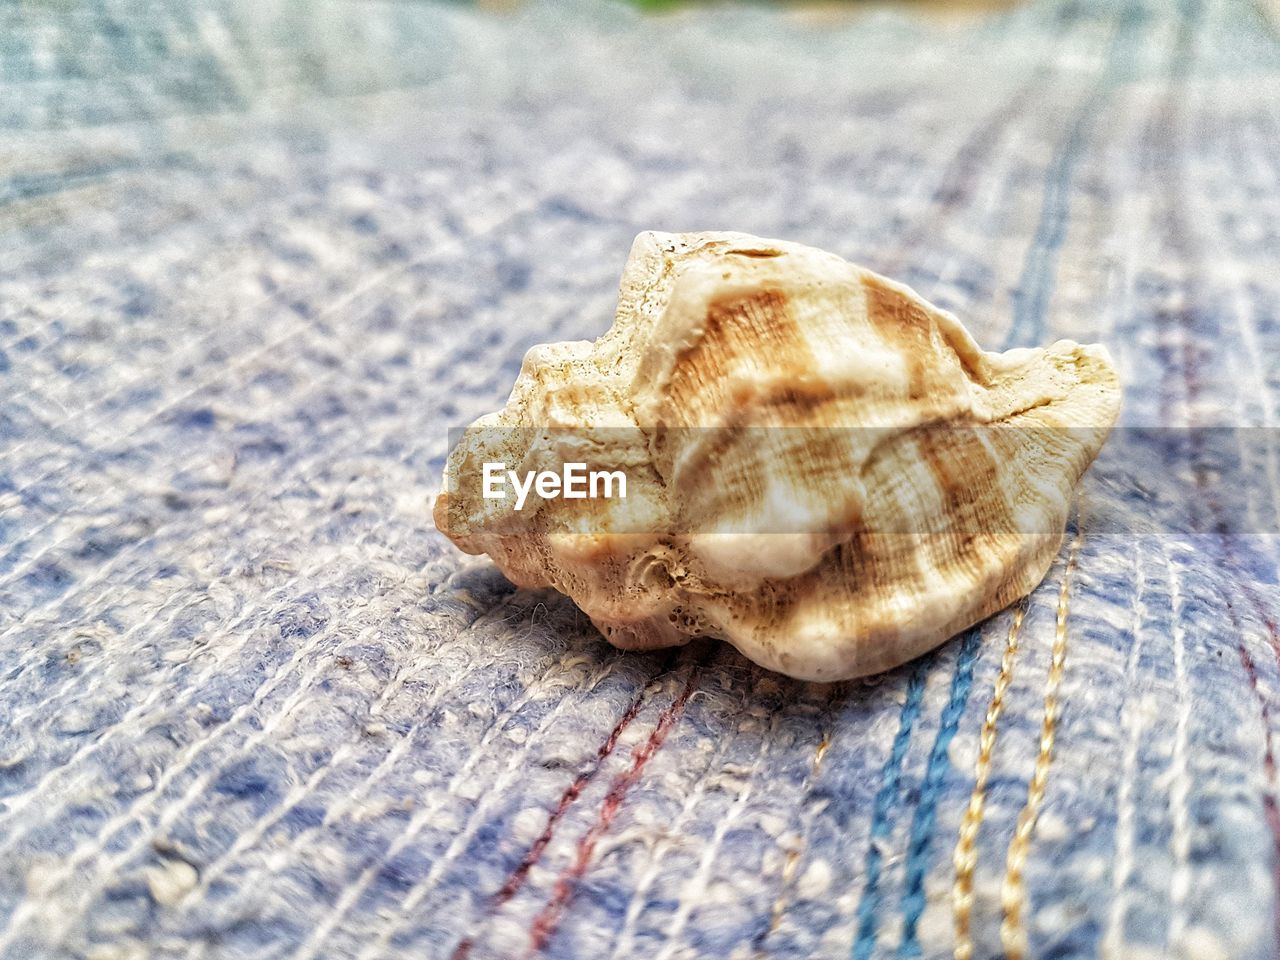 CLOSE-UP OF A SHELL ON A TABLE